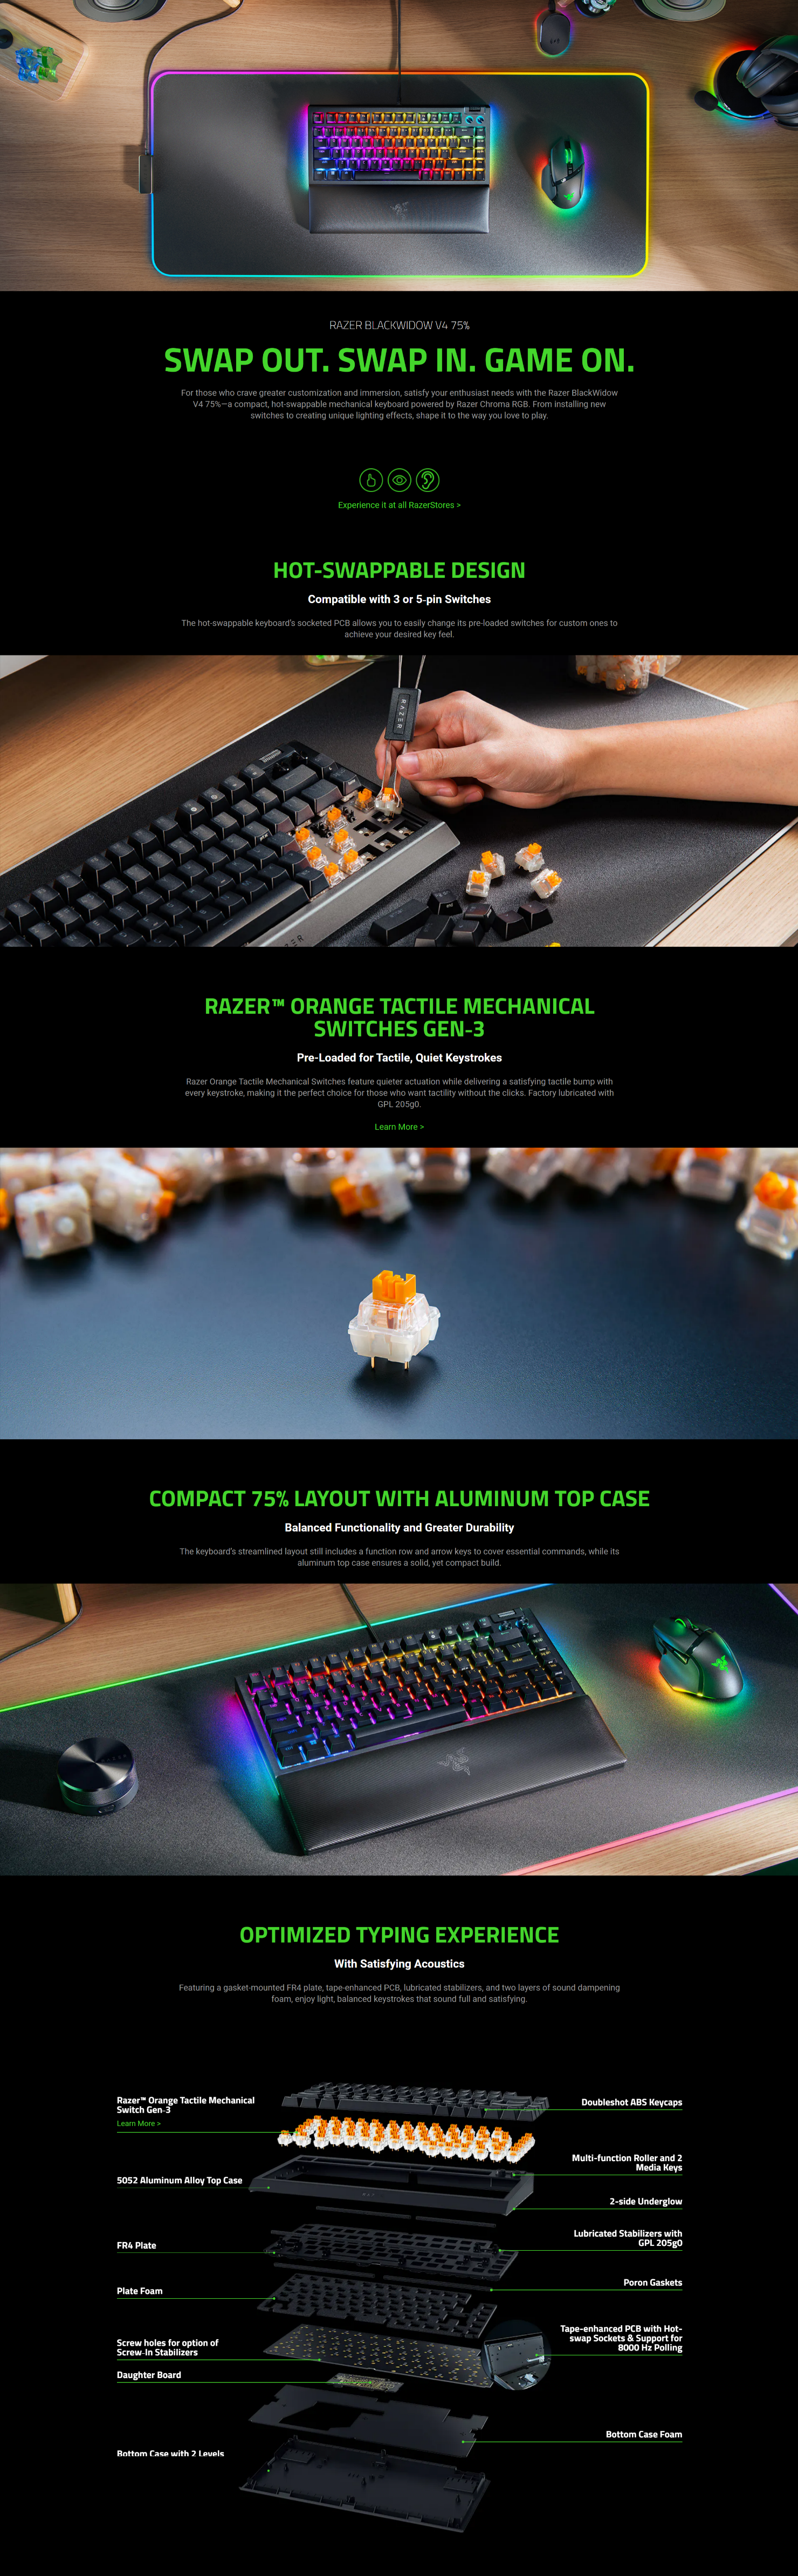 A large marketing image providing additional information about the product Razer BlackWidow V4 75% - Compact Mechanical Gaming Keyboard (Black) - Additional alt info not provided